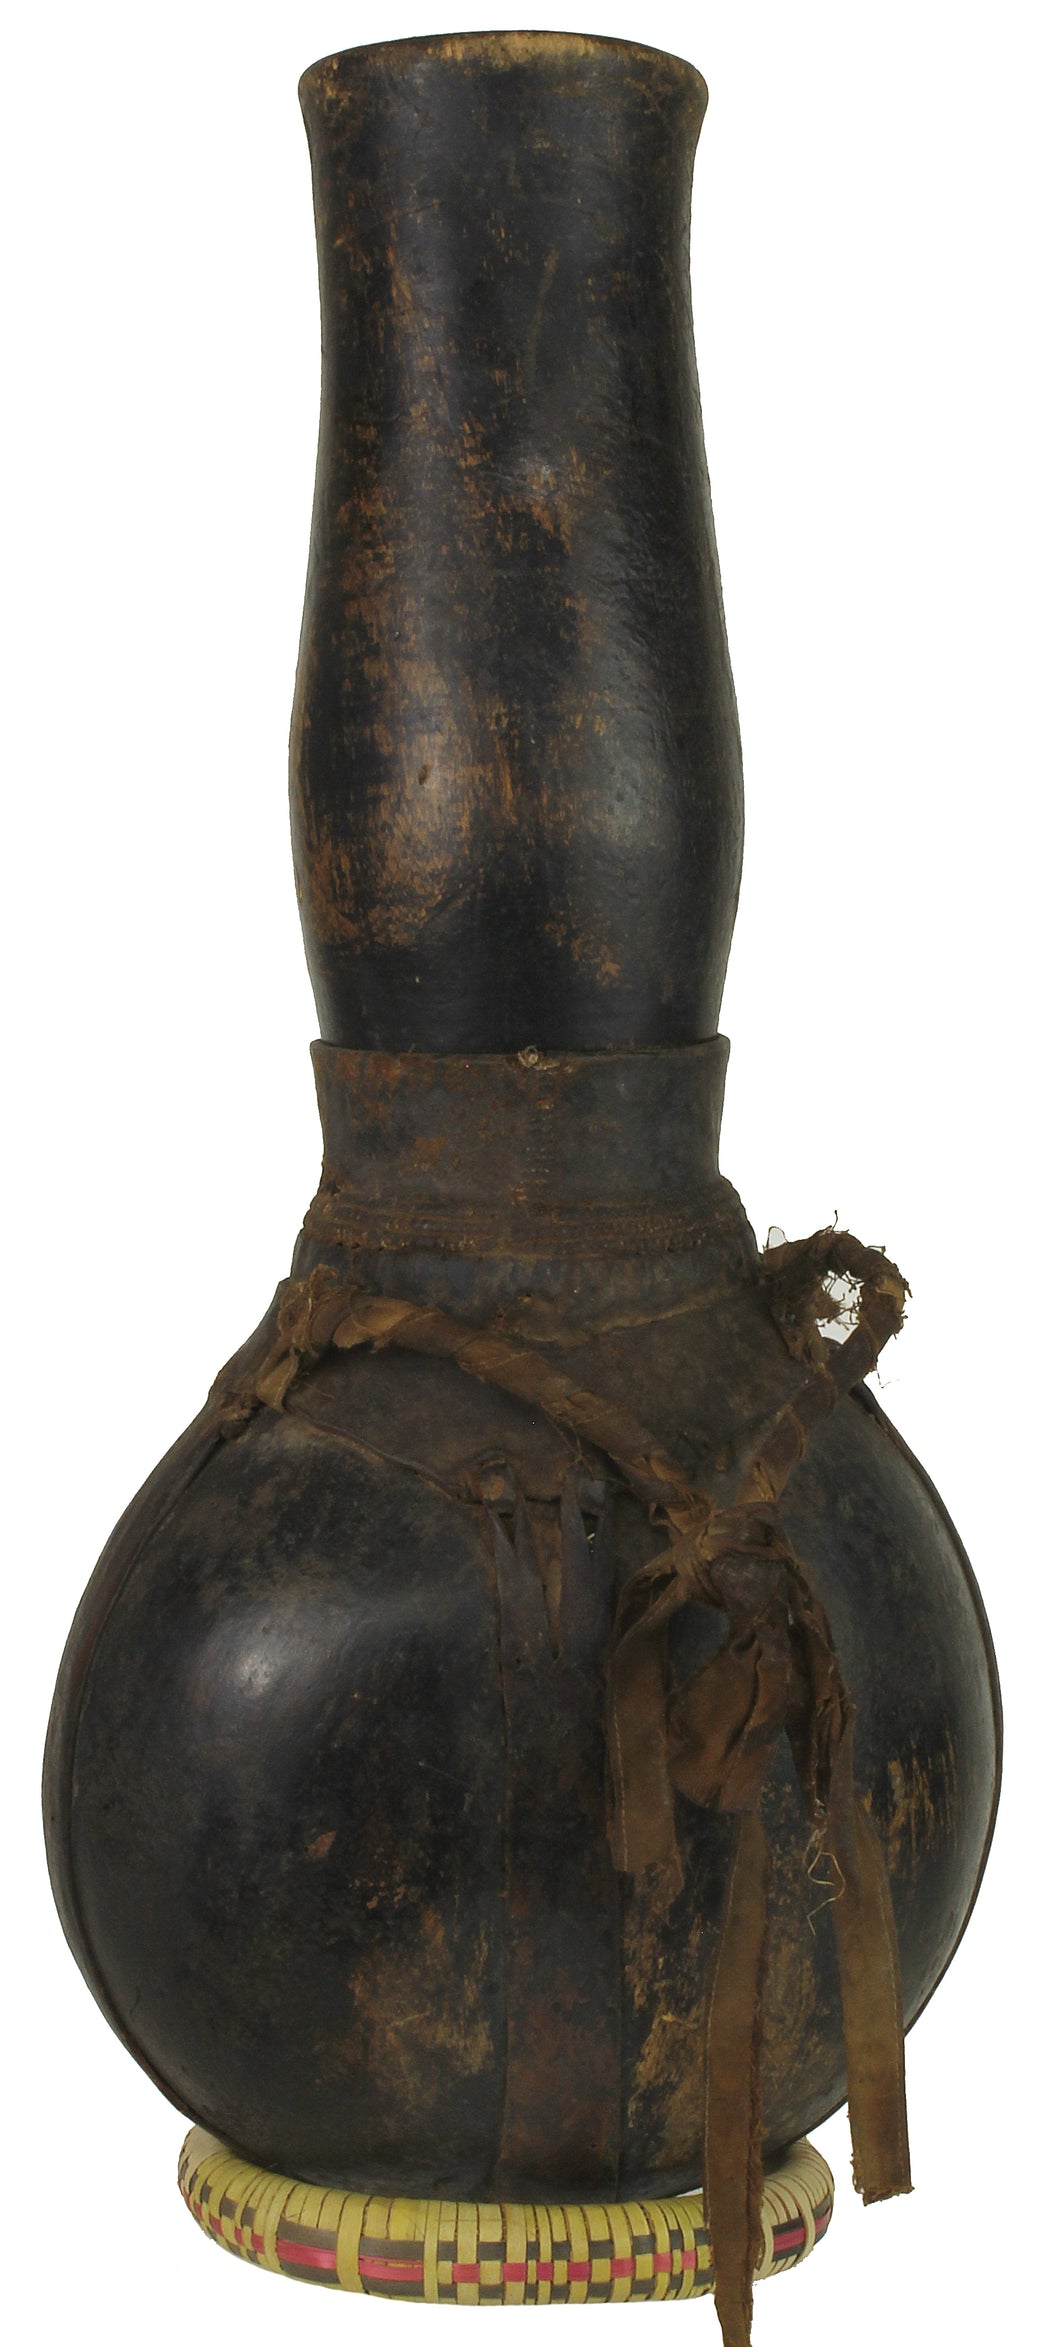 Vintage Wooden & Leather Milk Vessel from Congo, Africa | 19" - Niger Bend